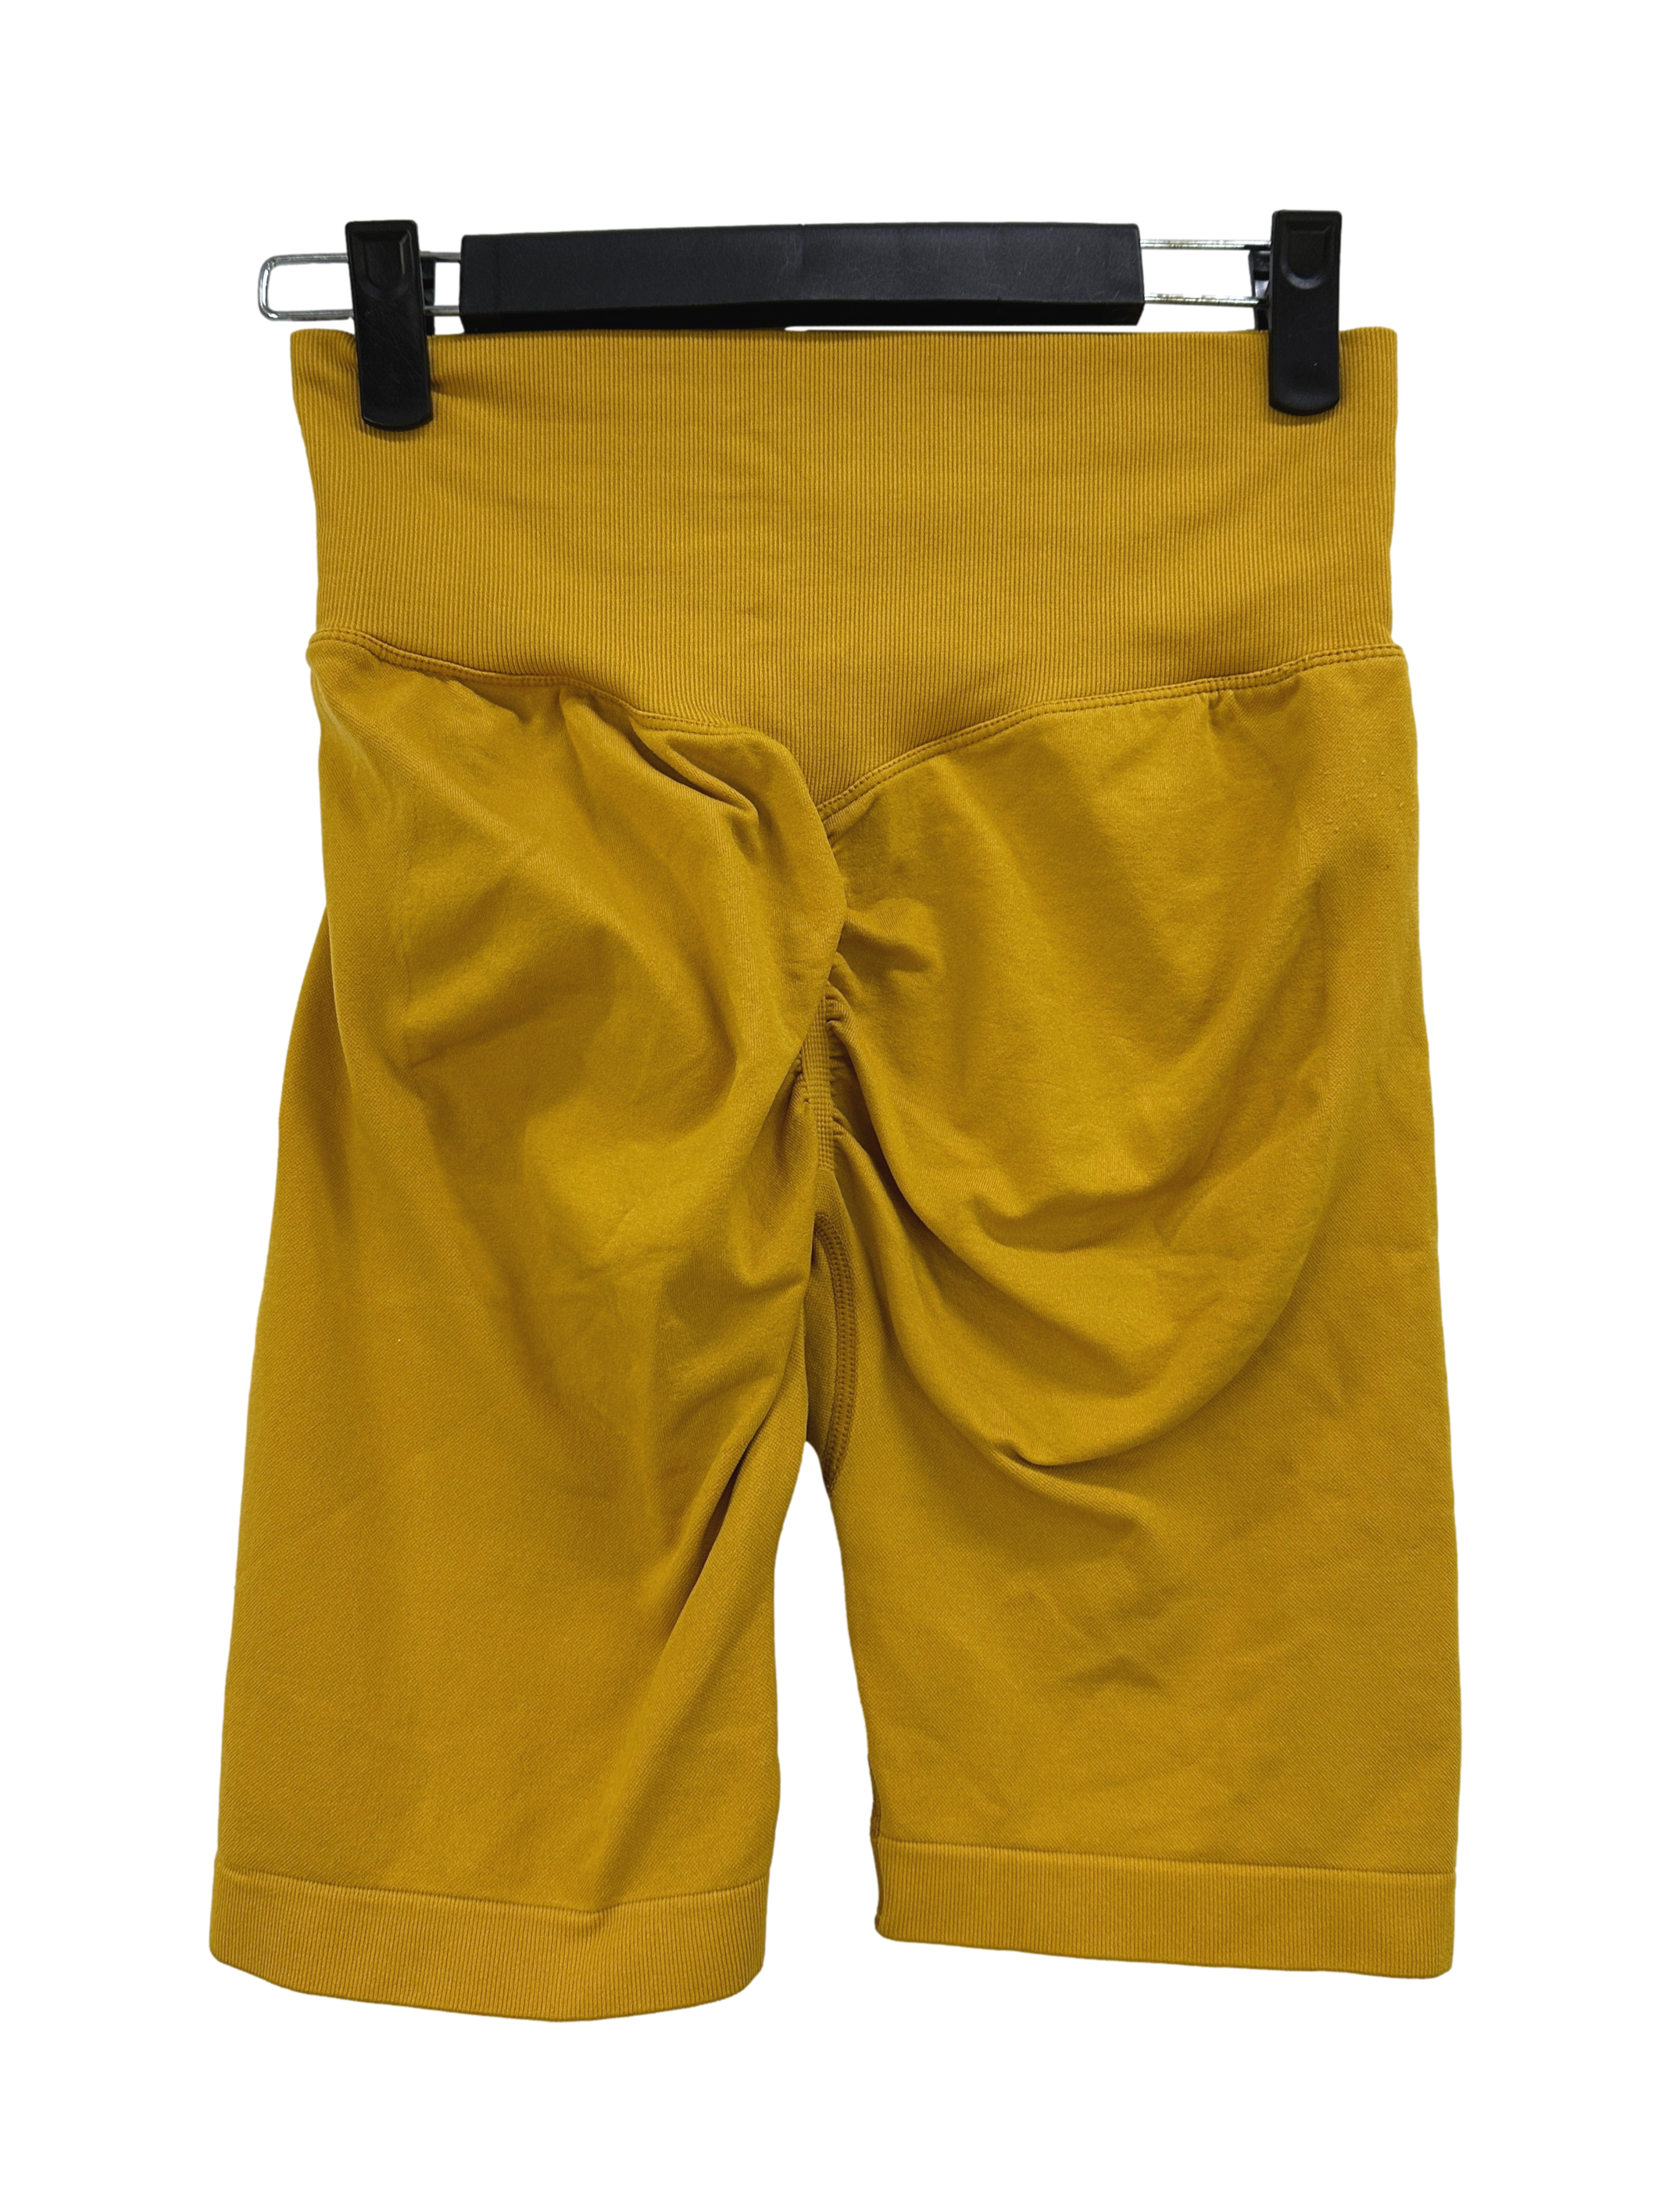 Mustard Yellow High-Waisted Ruched Bicycle Shorts